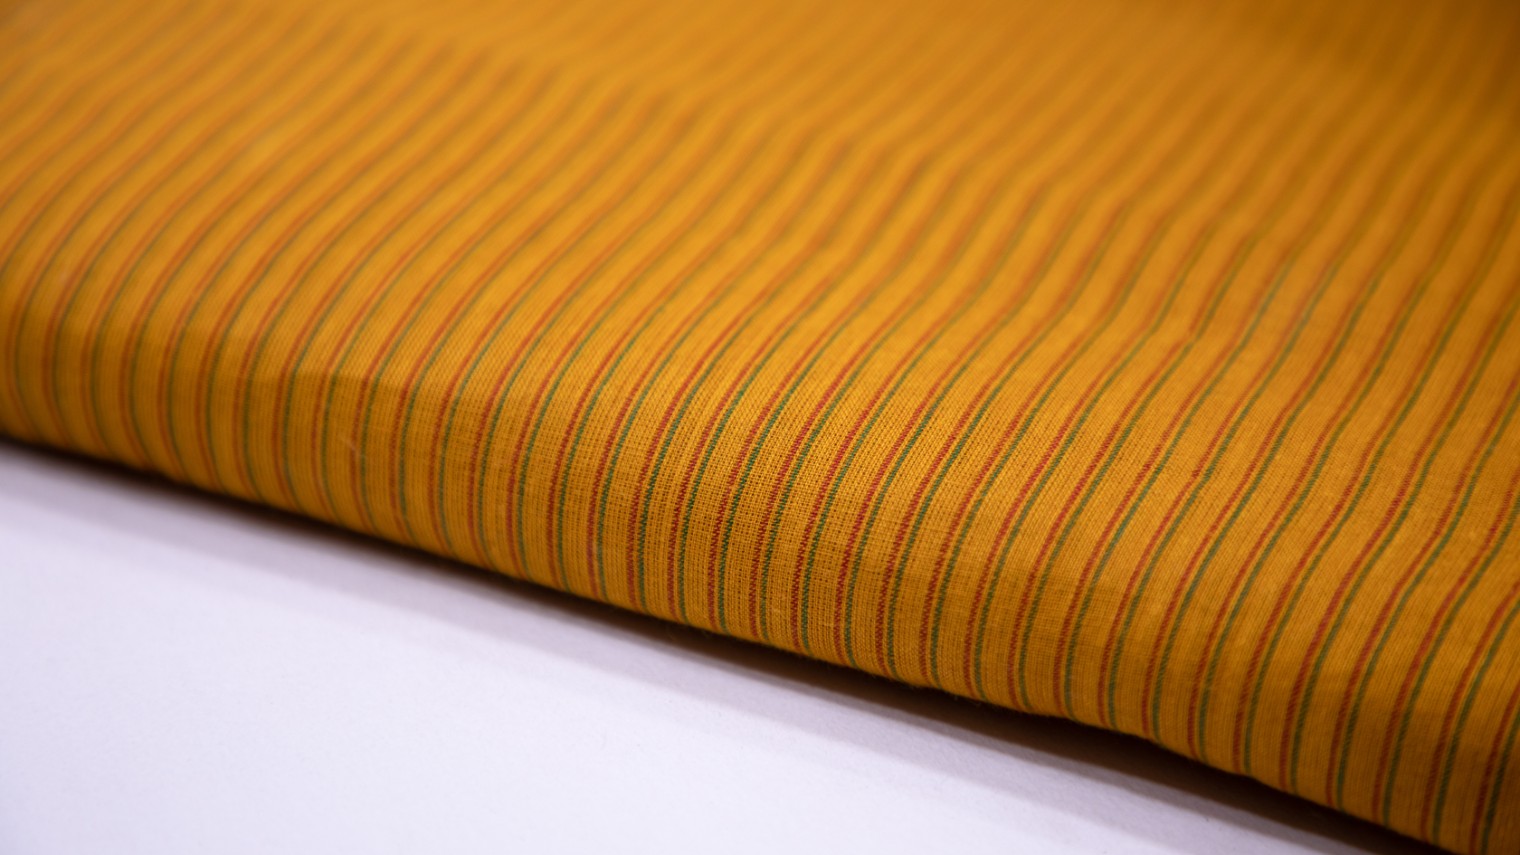 TURMERIC YELLOW COLOR SOUTH COTTON HANDLOOM DOUBLE STRIPES WEAVE FABRIC - 4233